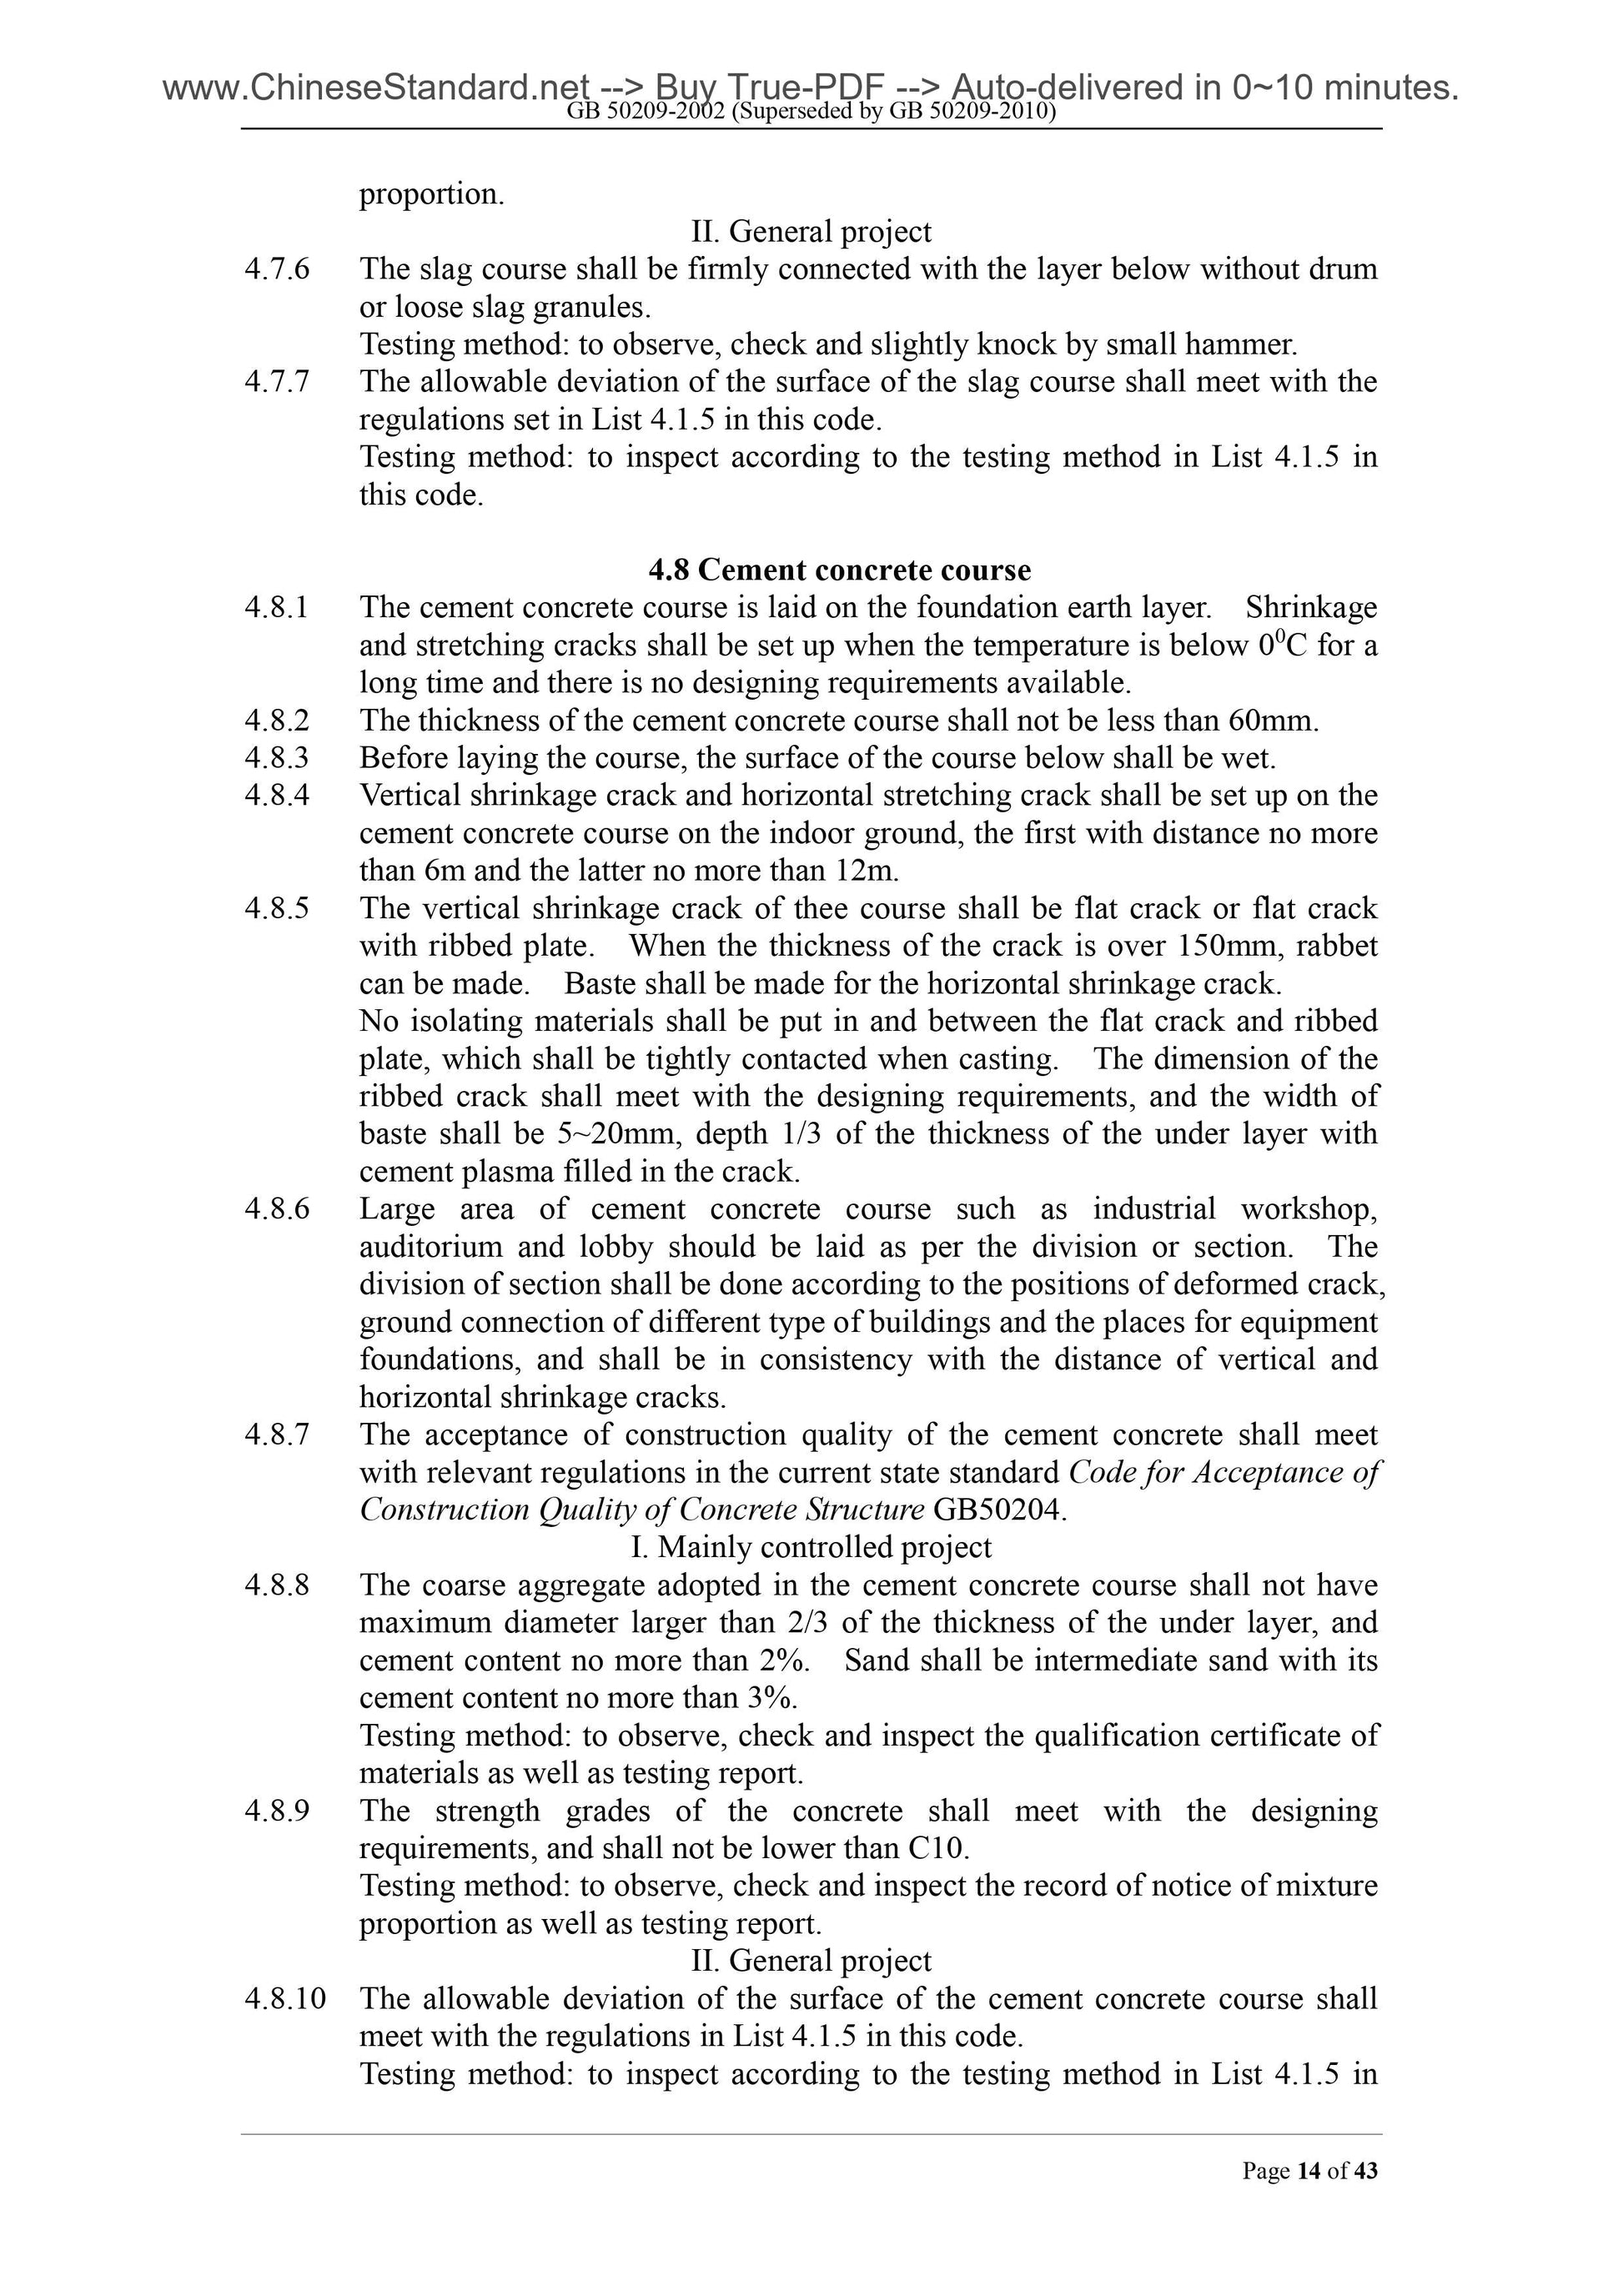 GB 50209-2002 Page 12